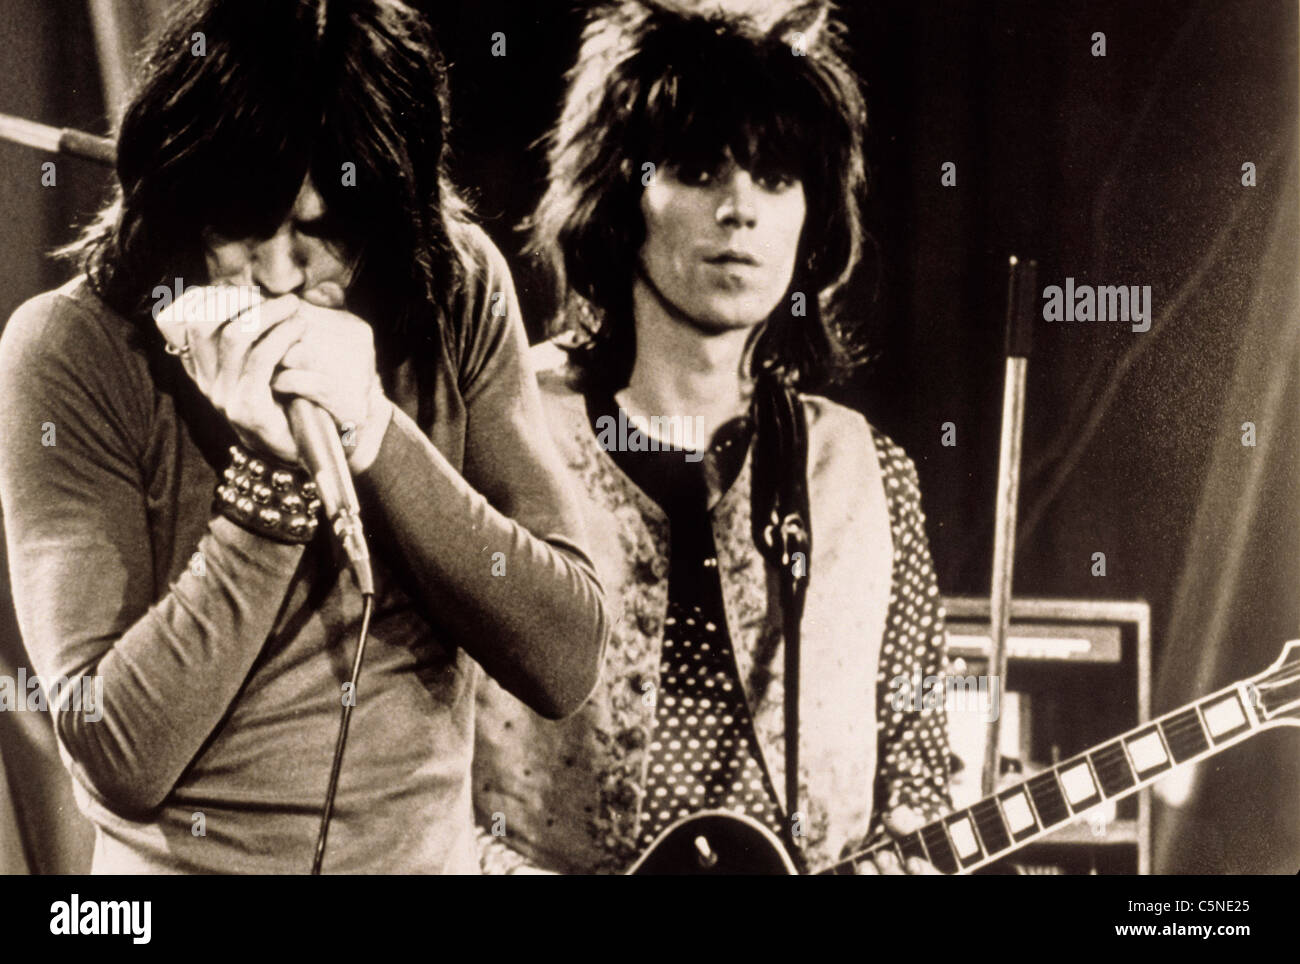 Rolling stones, Keith Richards, Mick Jagger Foto Stock